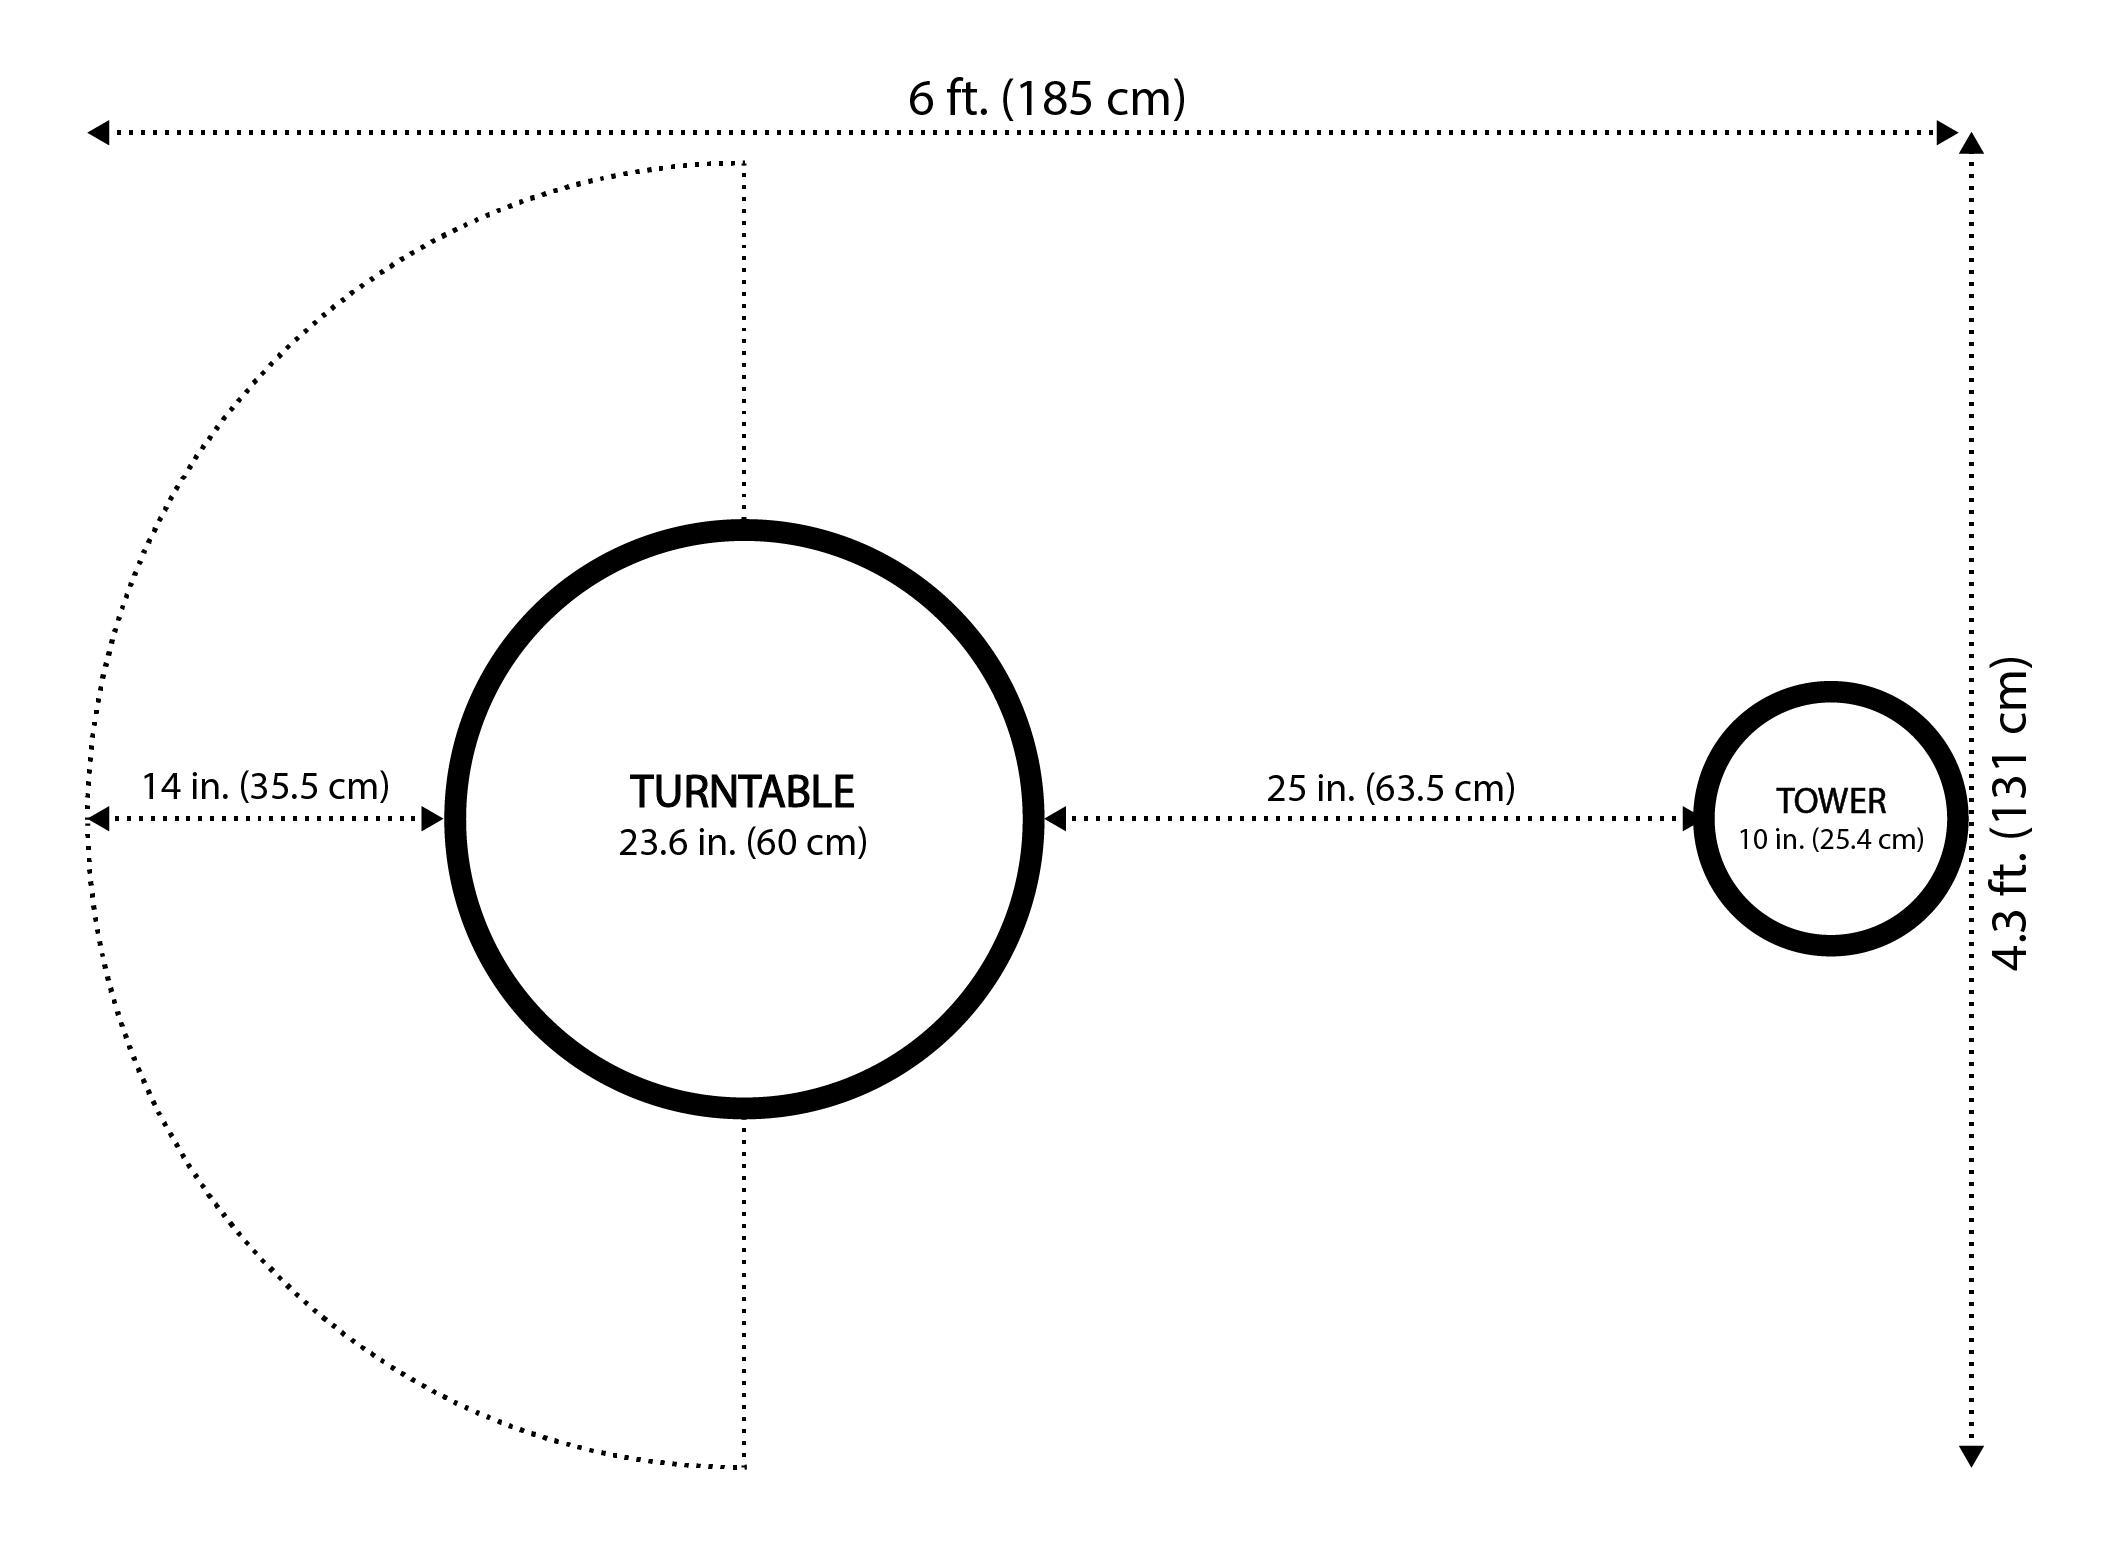 styku turntable and scanner distance diagram